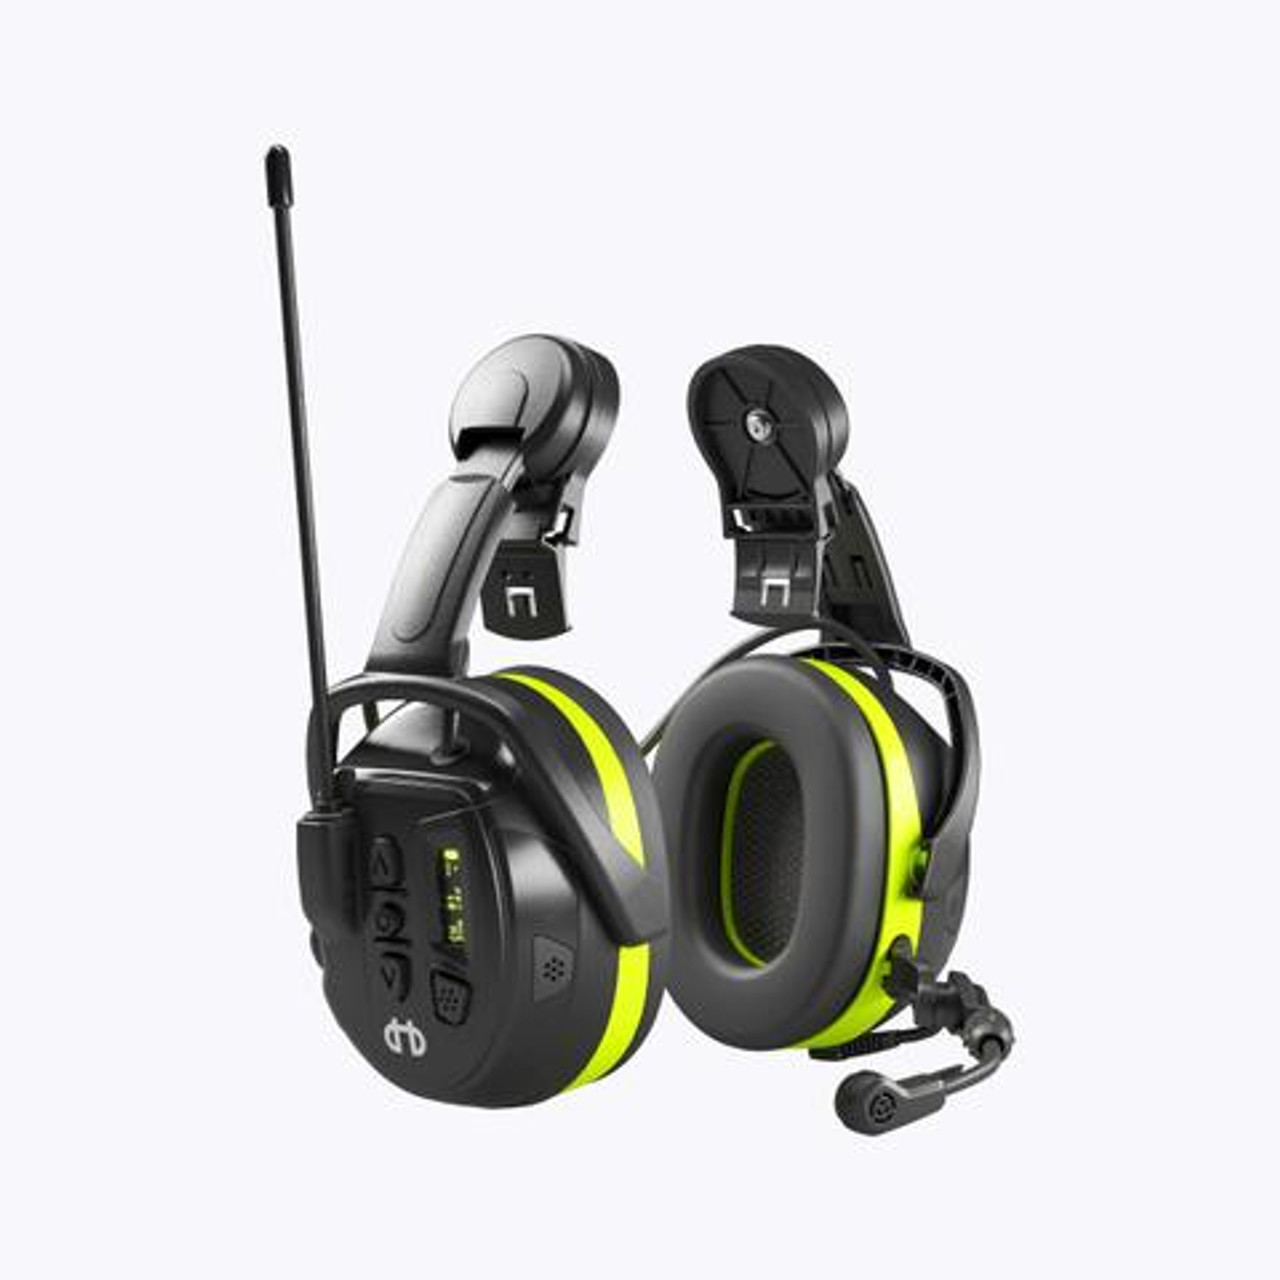 HELLBERG Hearing Protection | LOCAL 446 Bluetooth Earmuffs Hearing Protection with Active Monitoring and Two Way Radio in Helmet Version